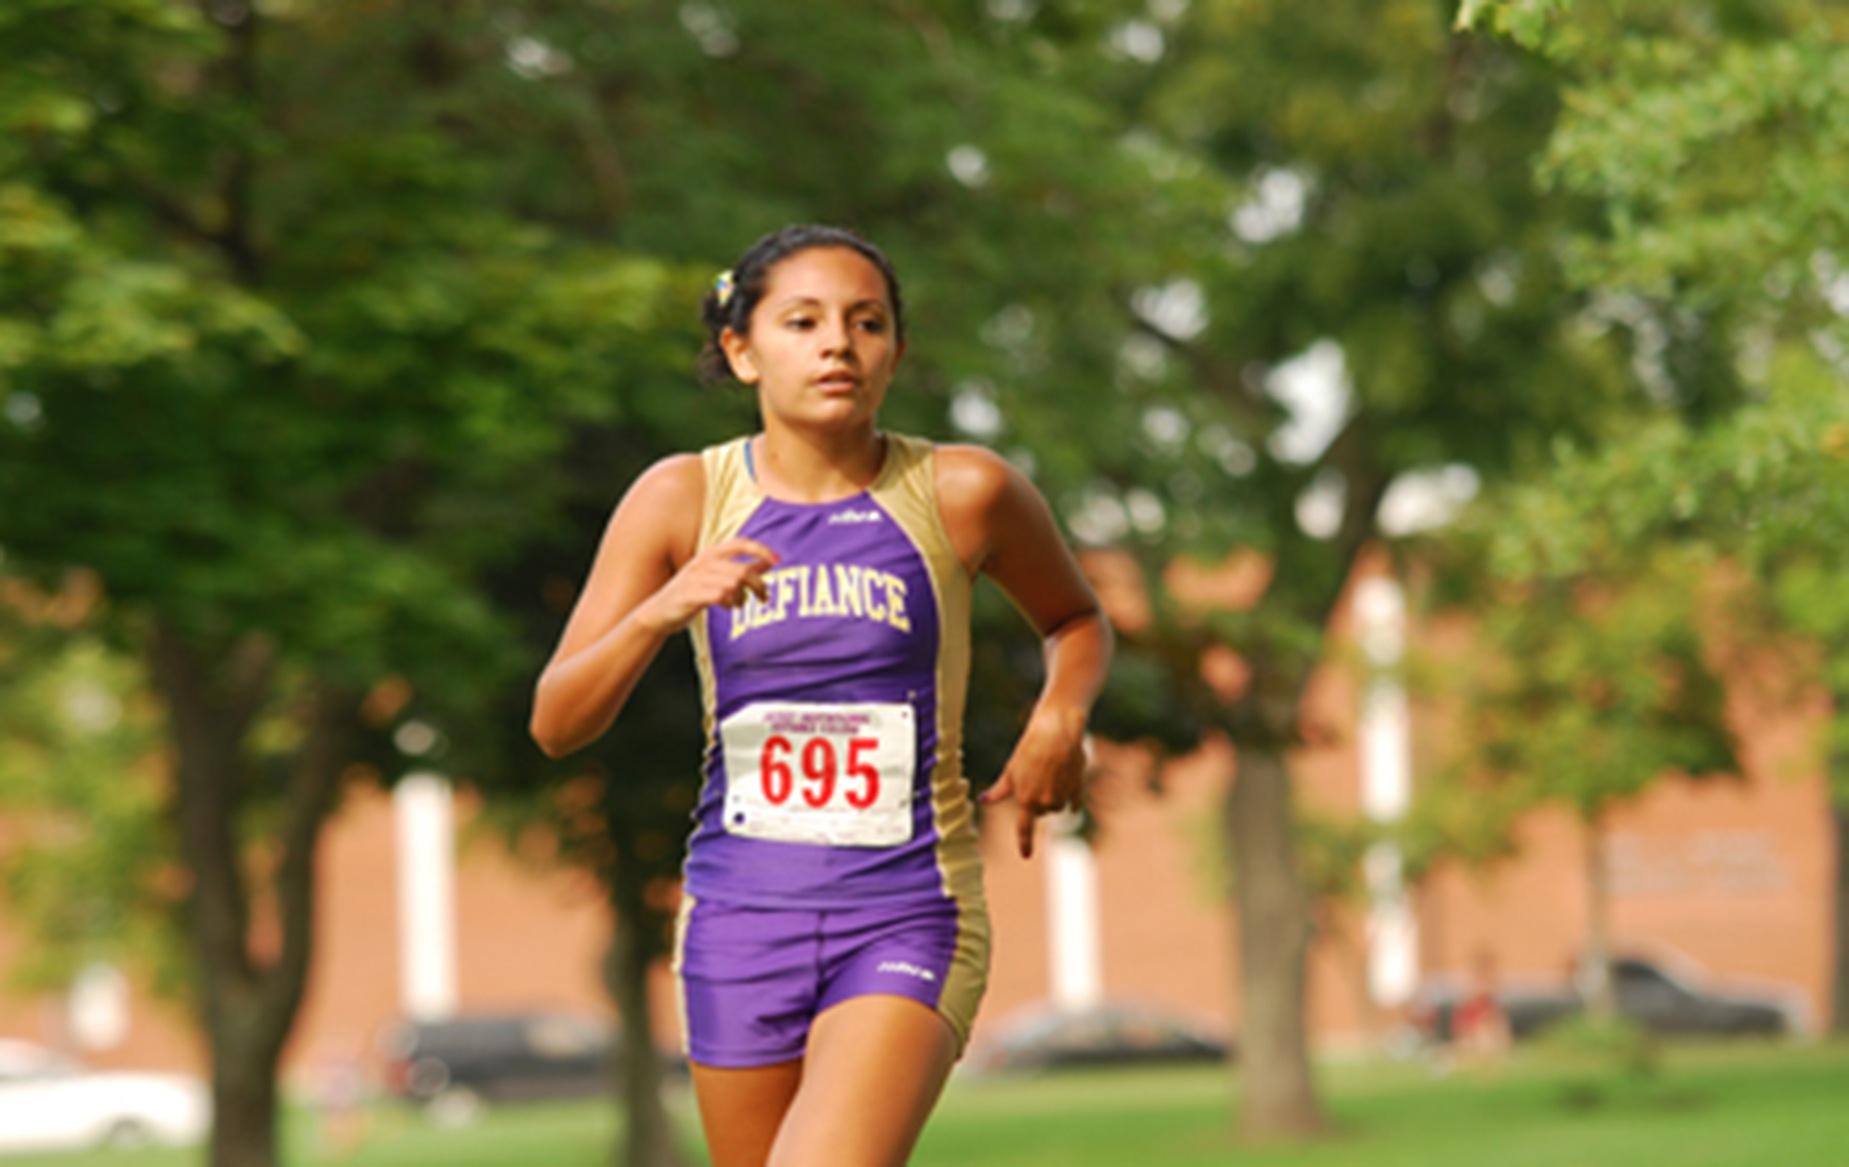 Rodriguez Leads Lady Harriers at Penn-State Behrend Invite